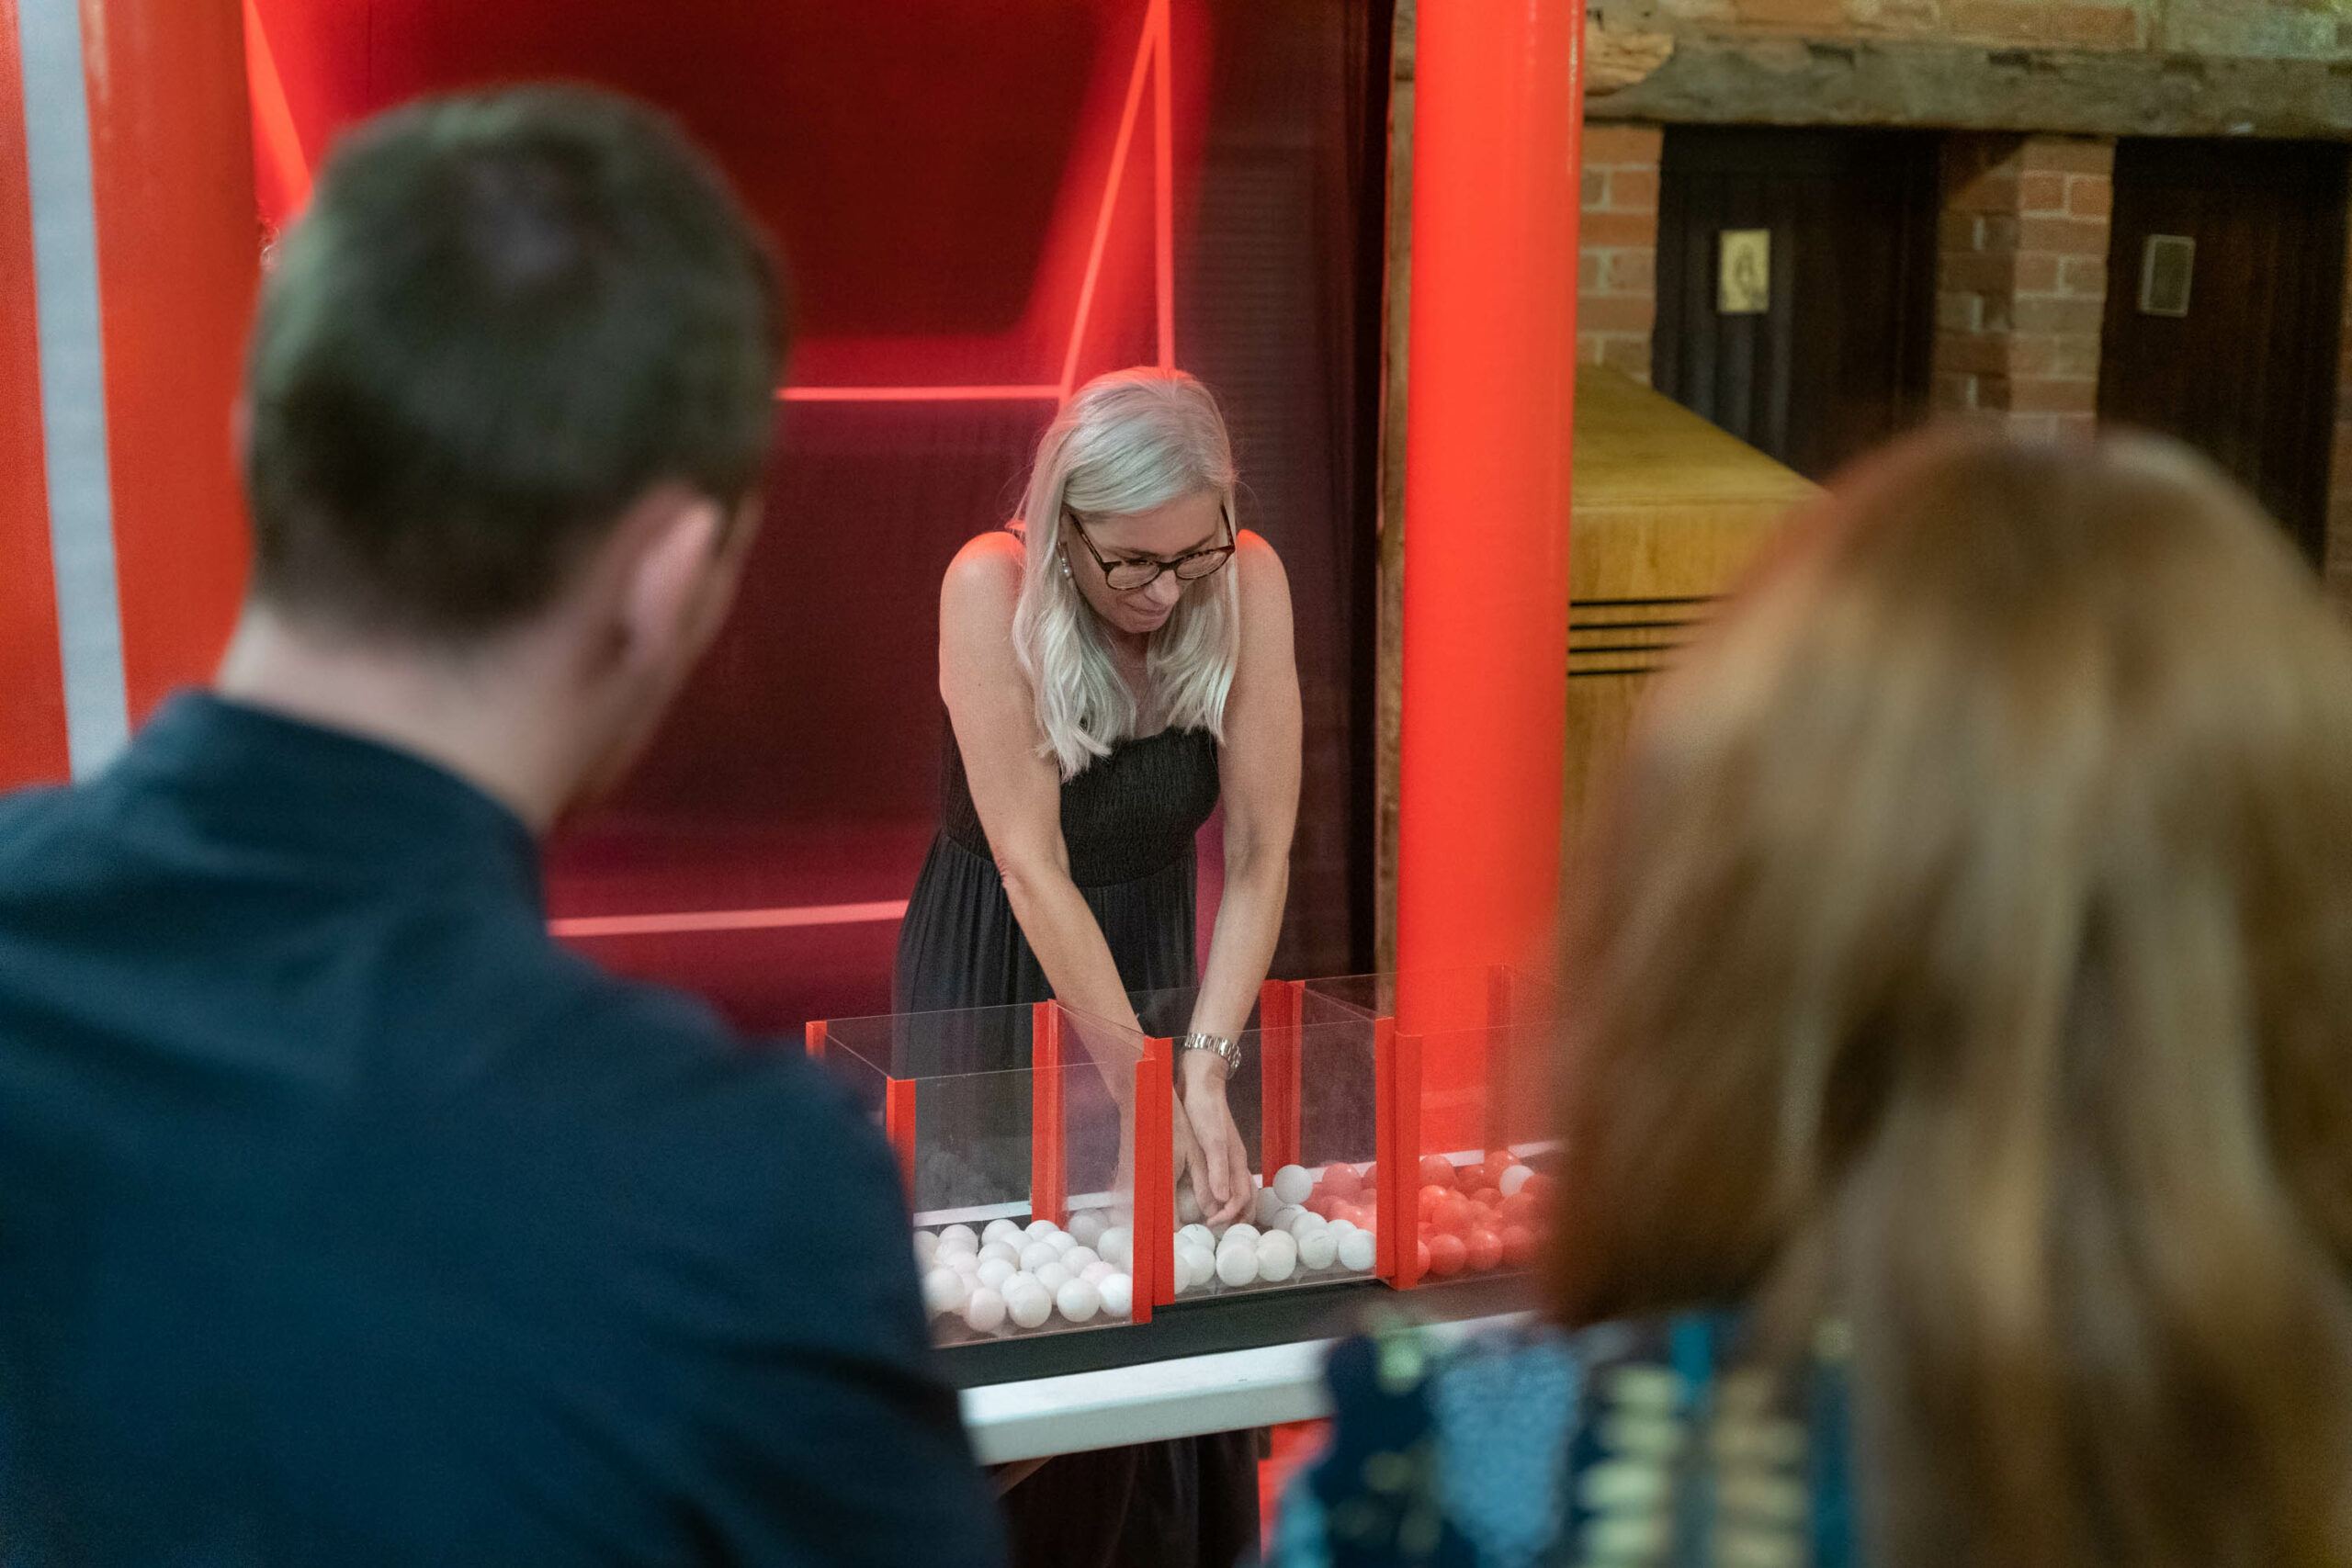 A woman separating coloured balls during an Under Pressure team building game